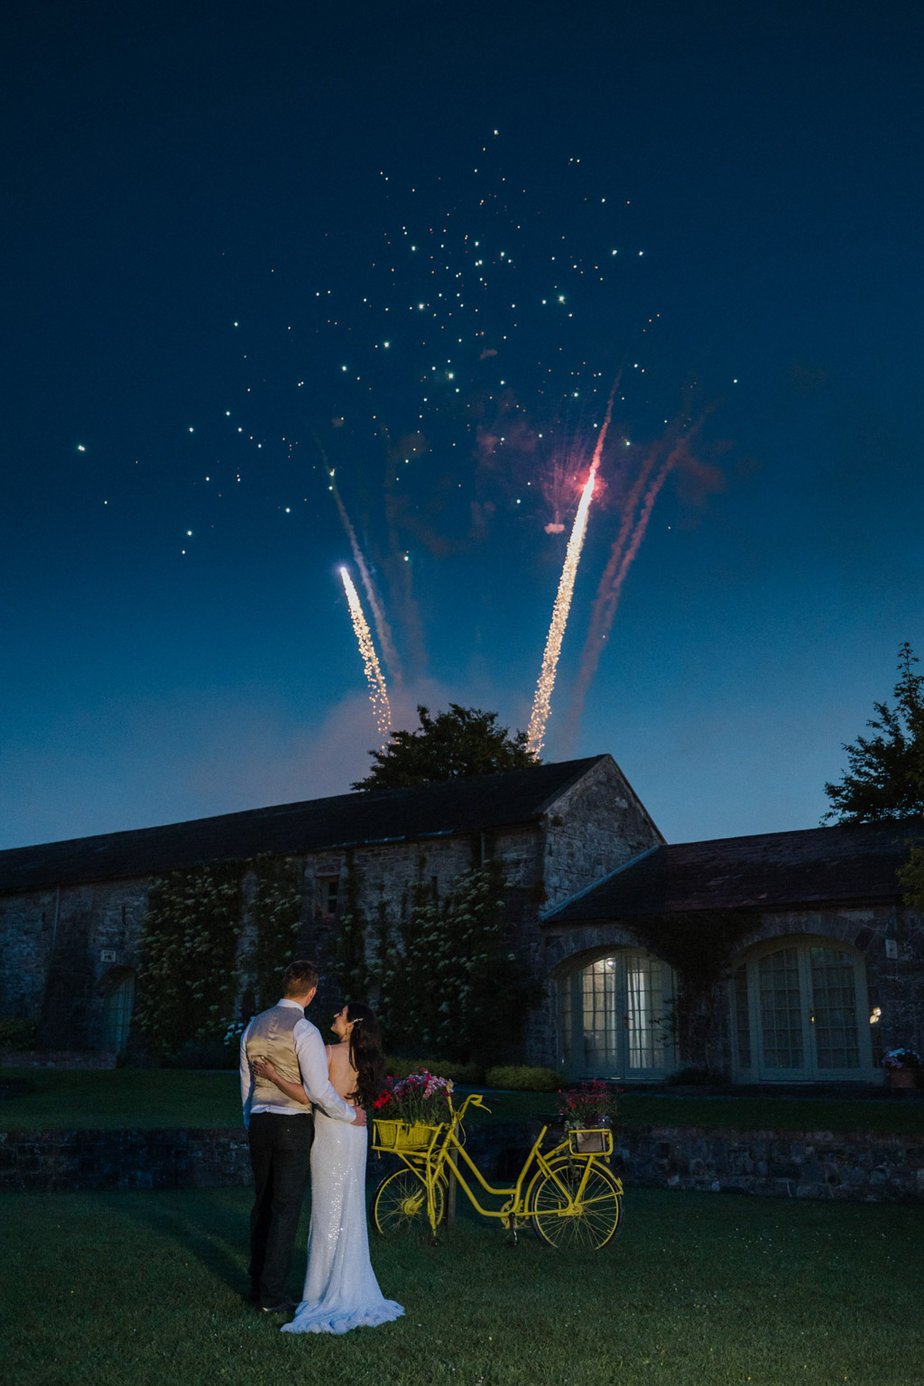 Where to Hire Wedding Fireworks | Find out more on Onefabday.com